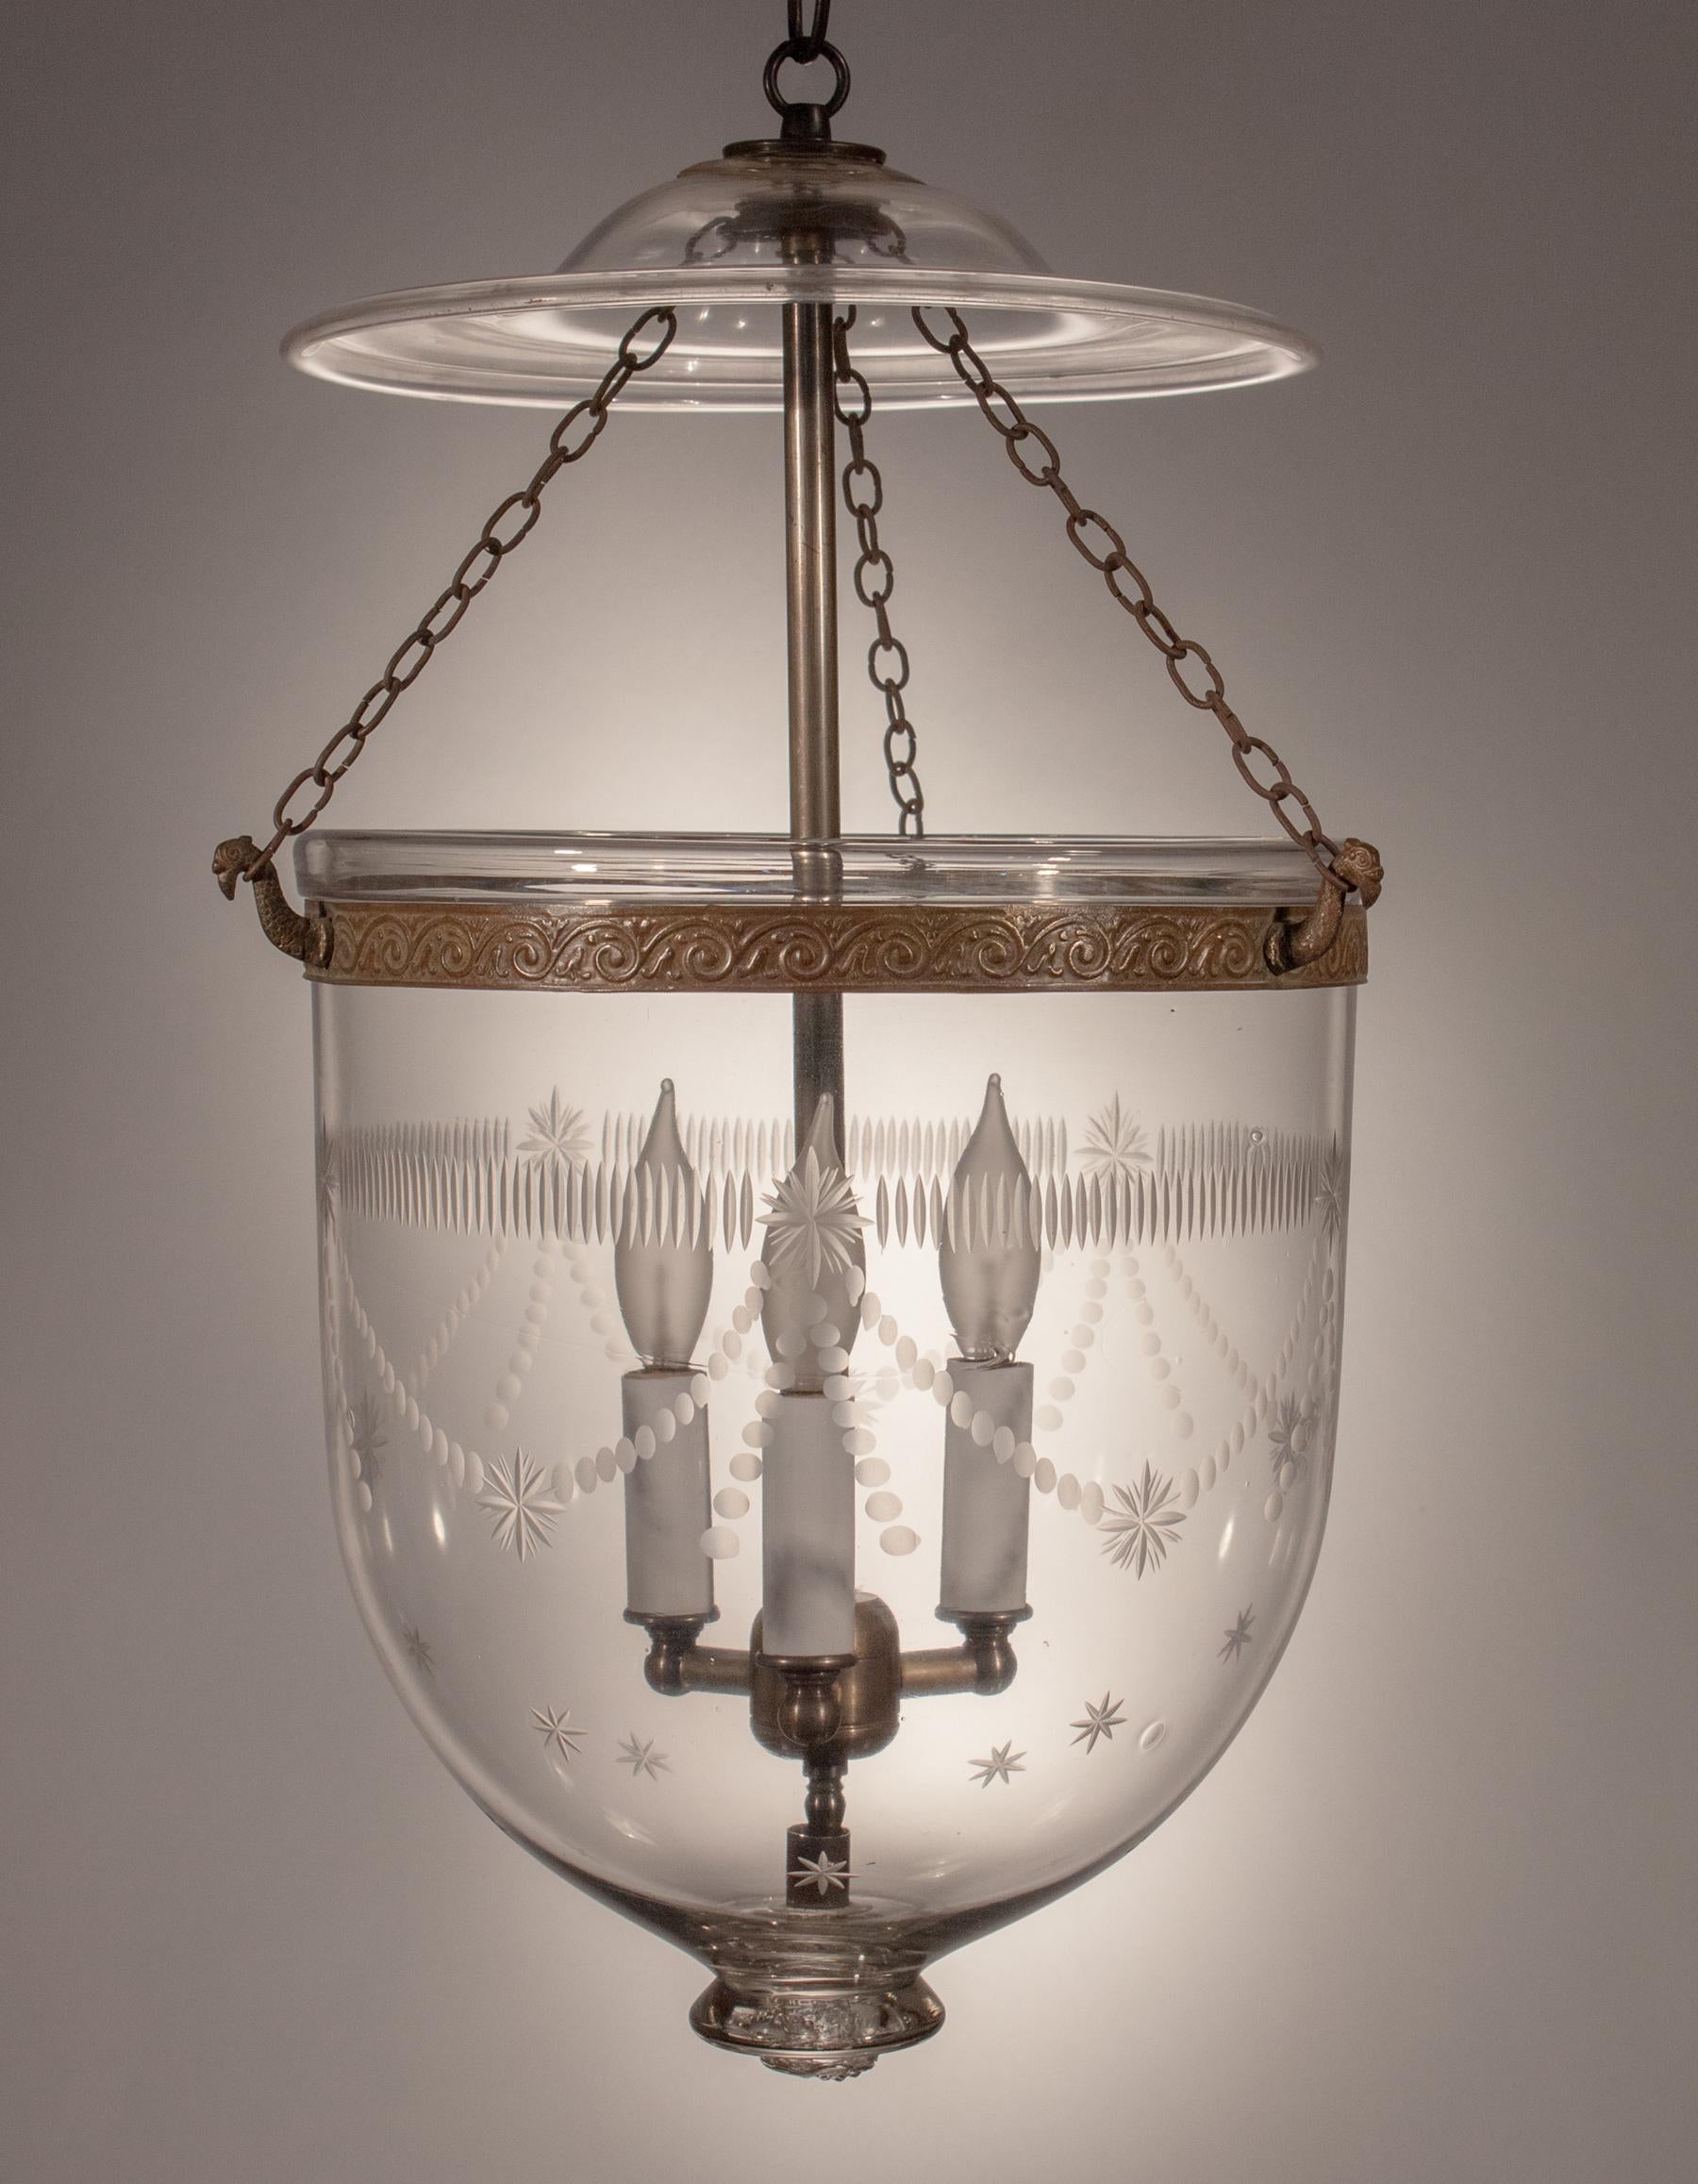 The quality of the handblown glass in this circa 1880 hall lantern is excellent. The bell jar has shapely form and the etched Federal style motif is a lovely complement. The brass band, which was replaced at some point in the lantern's journey, has